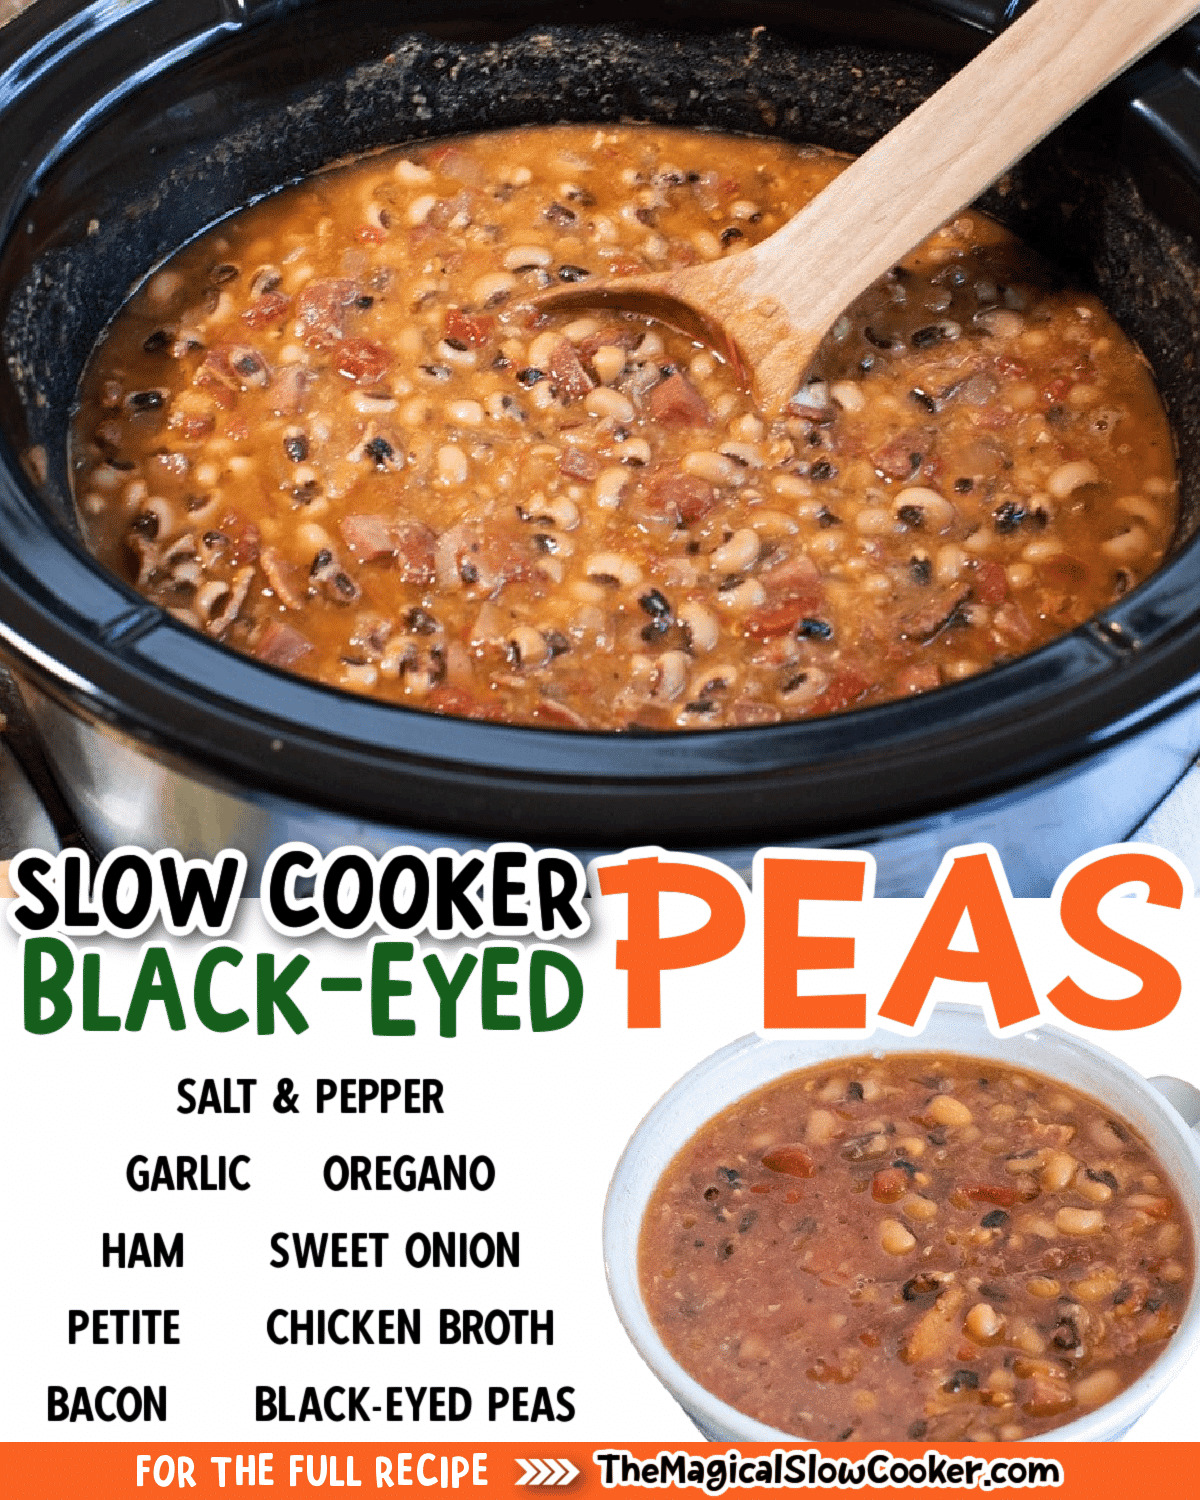 Slow Cooker Black-Eyed Peas Recipe - The Magical Slow Cooker